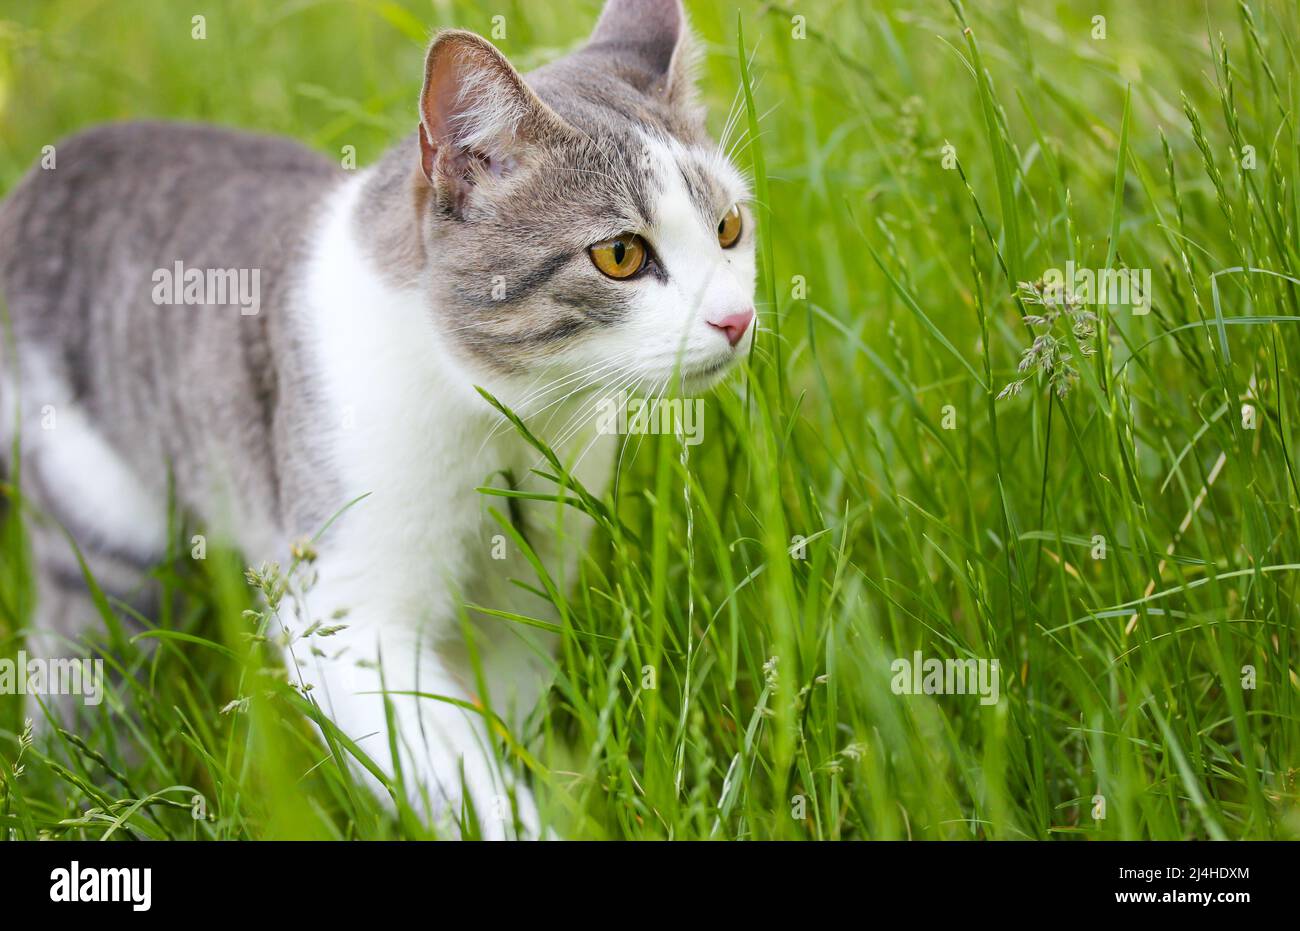 Pasture kugle bag Tabby bicolor white gray hunter cat with yellow eyes walking in high green  grass in spring. Feline outdoors in nature at summer day. Kat, gato, katt  Stock Photo - Alamy